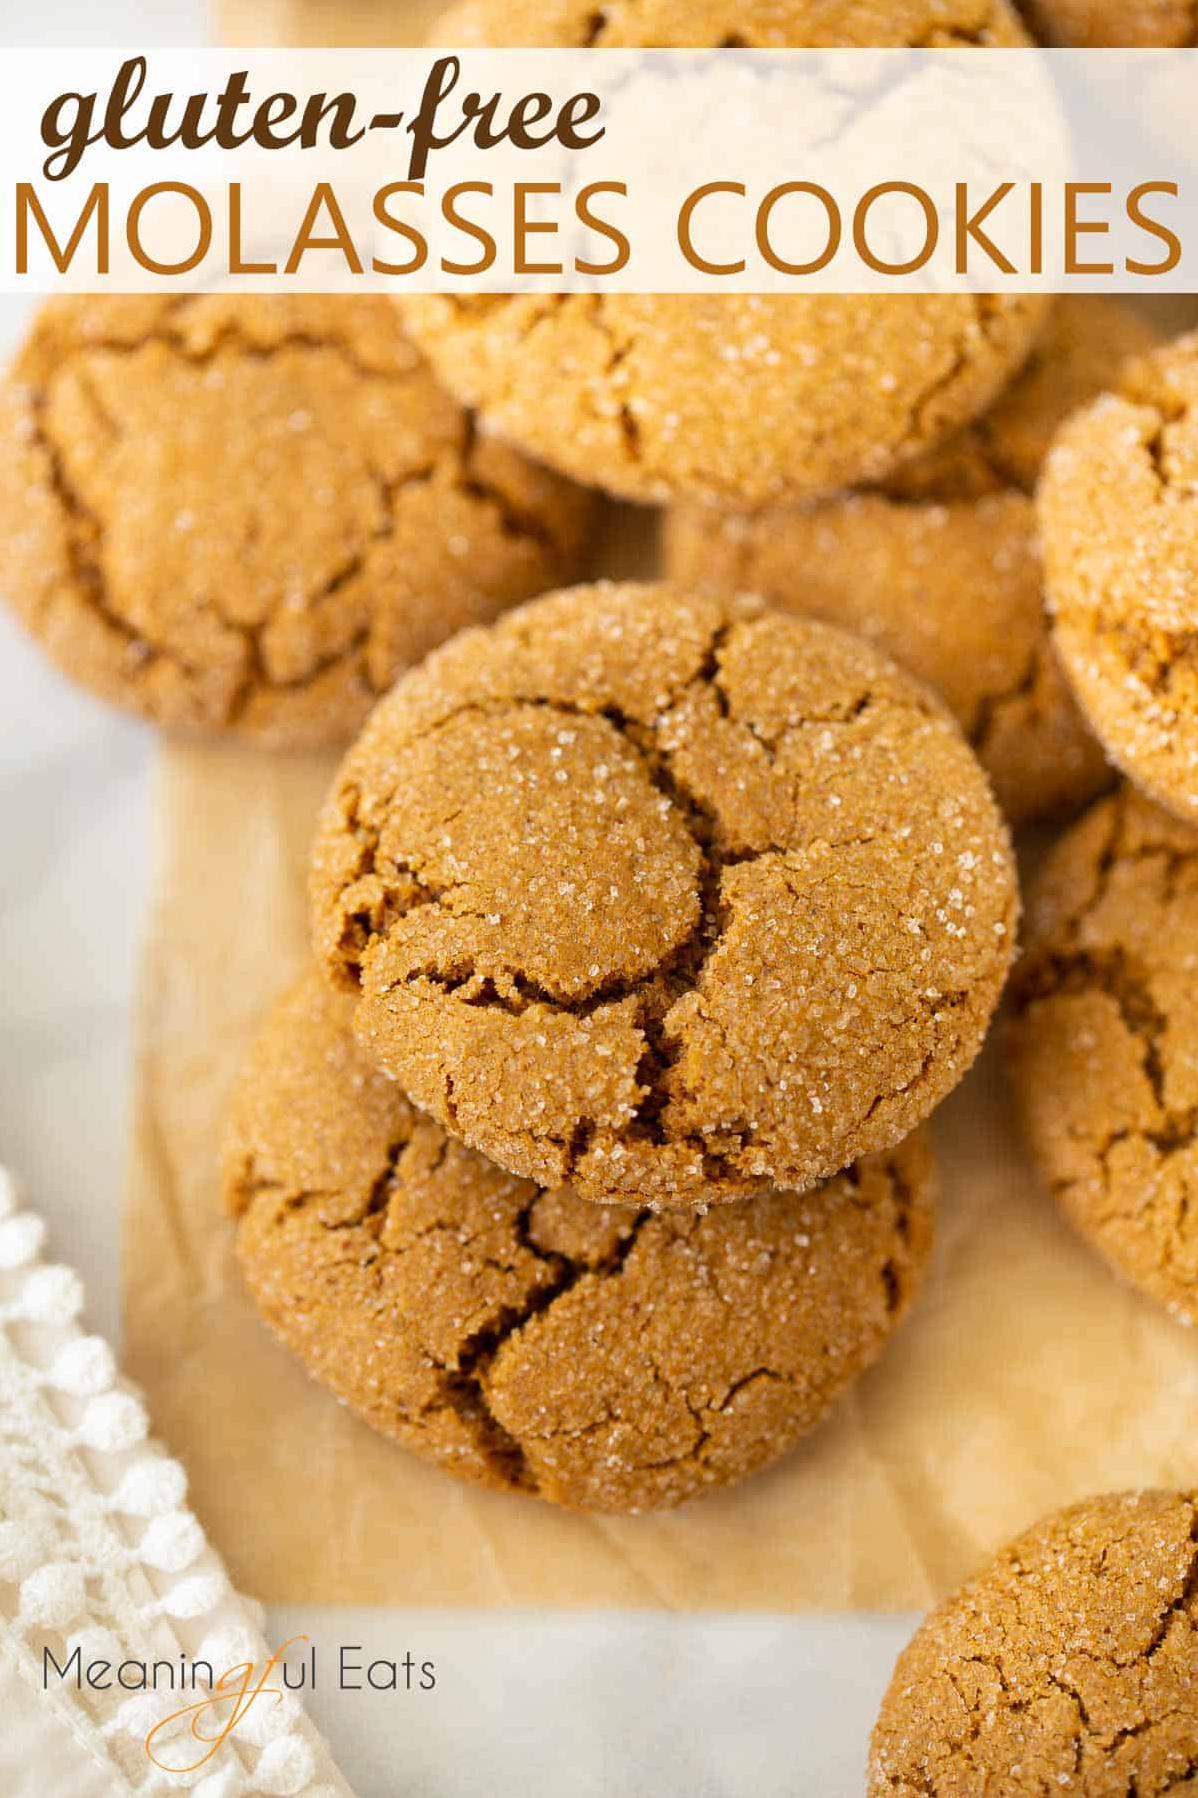 Deliciously Decadent Gluten-Free Molasses Crinkles